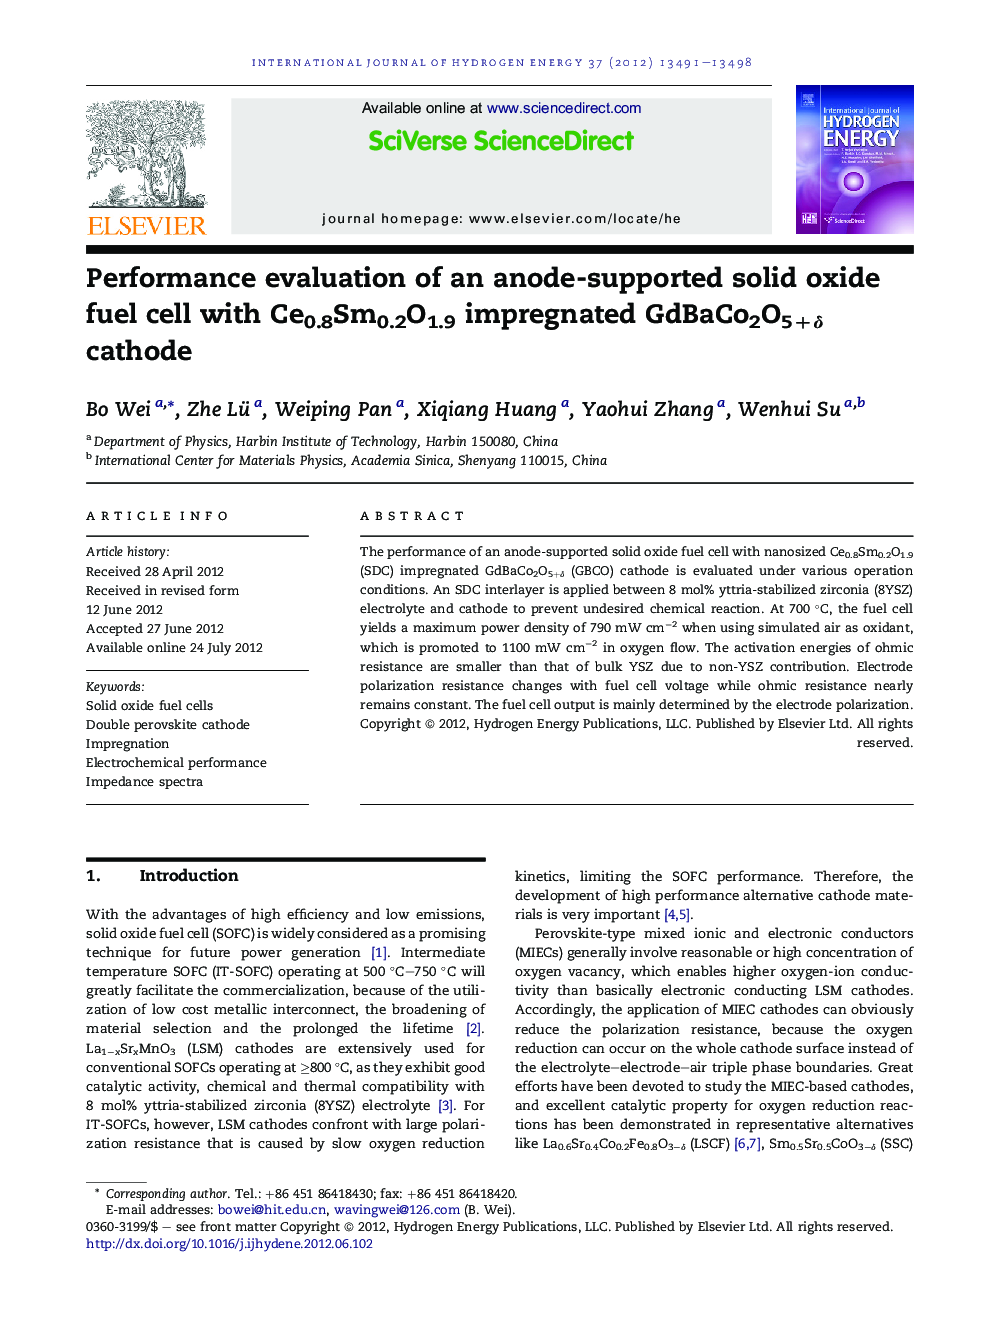 Performance evaluation of an anode-supported solid oxide fuel cell with Ce0.8Sm0.2O1.9 impregnated GdBaCo2O5+δ cathode